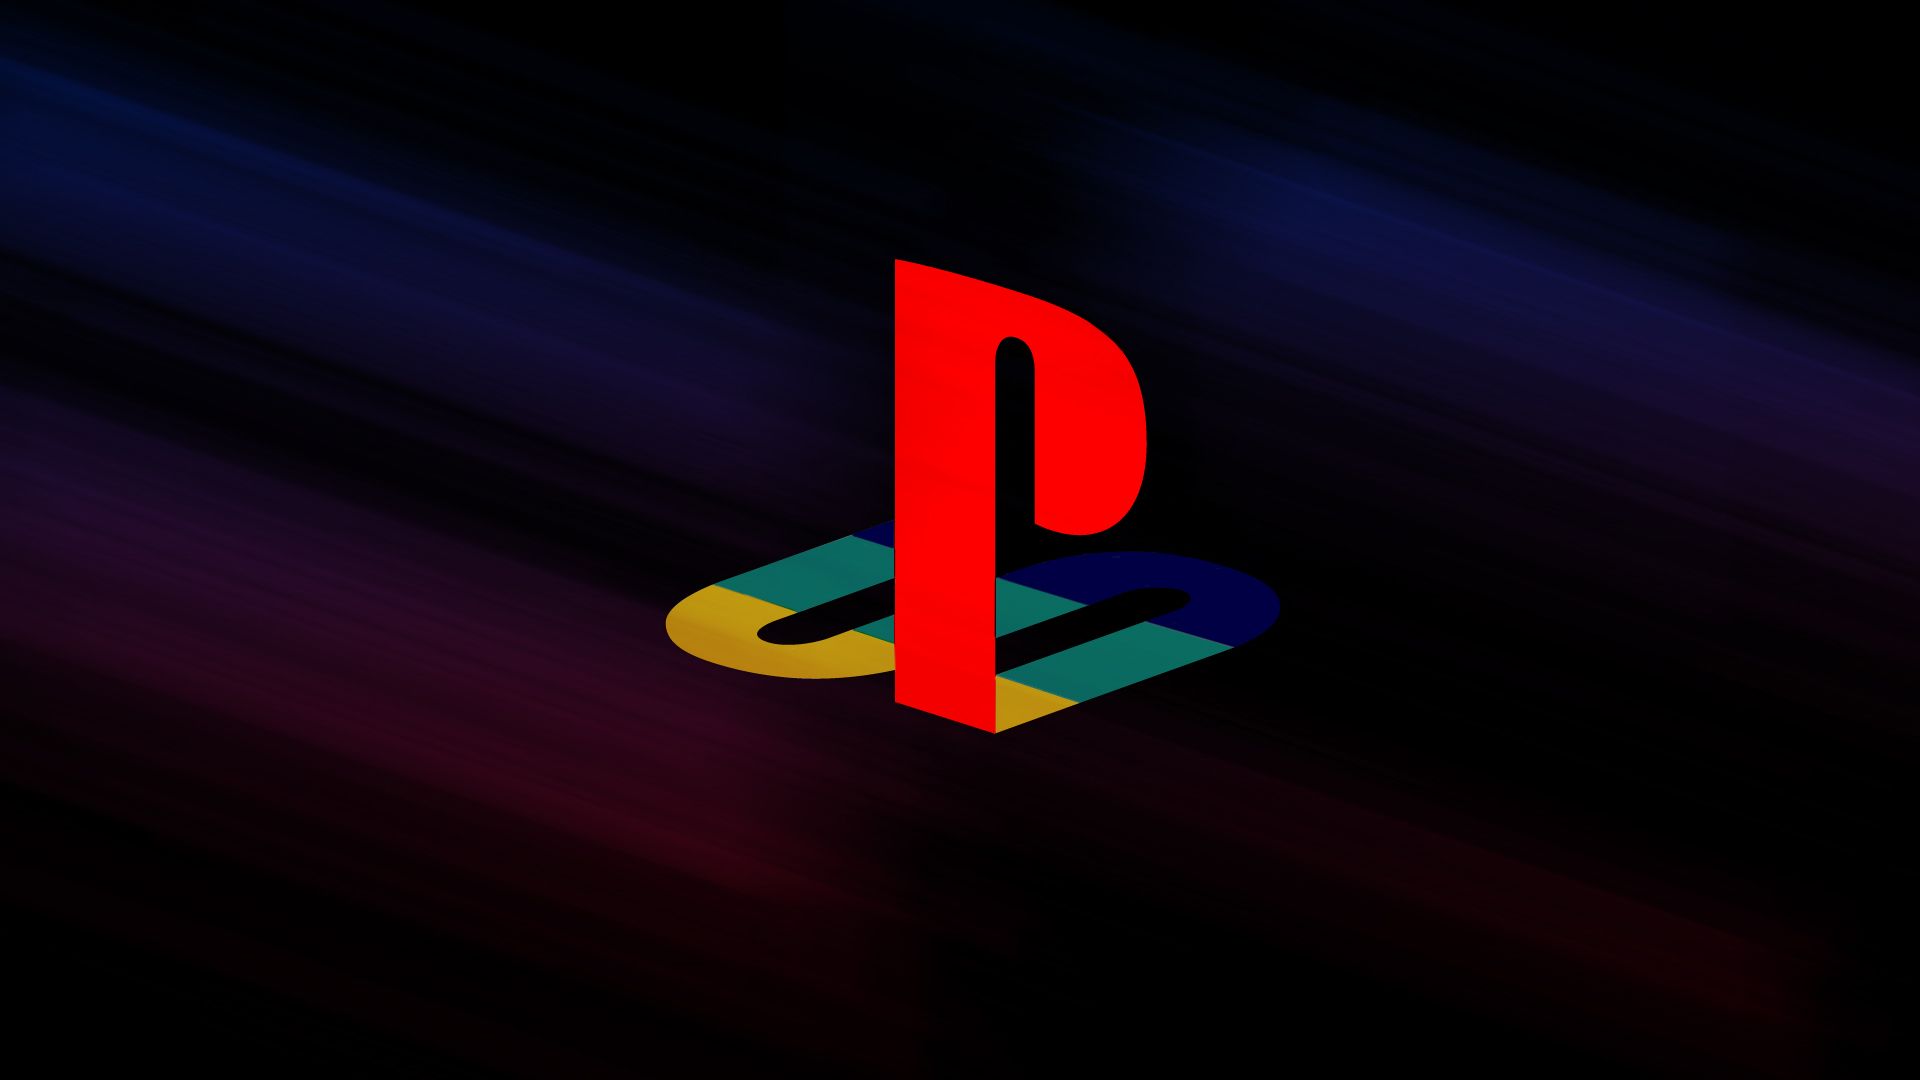 PSX Wallpaper. Frogger PSX Wallpaper, PSX Wallpaper and Syphon Filter PSX Wallpaper